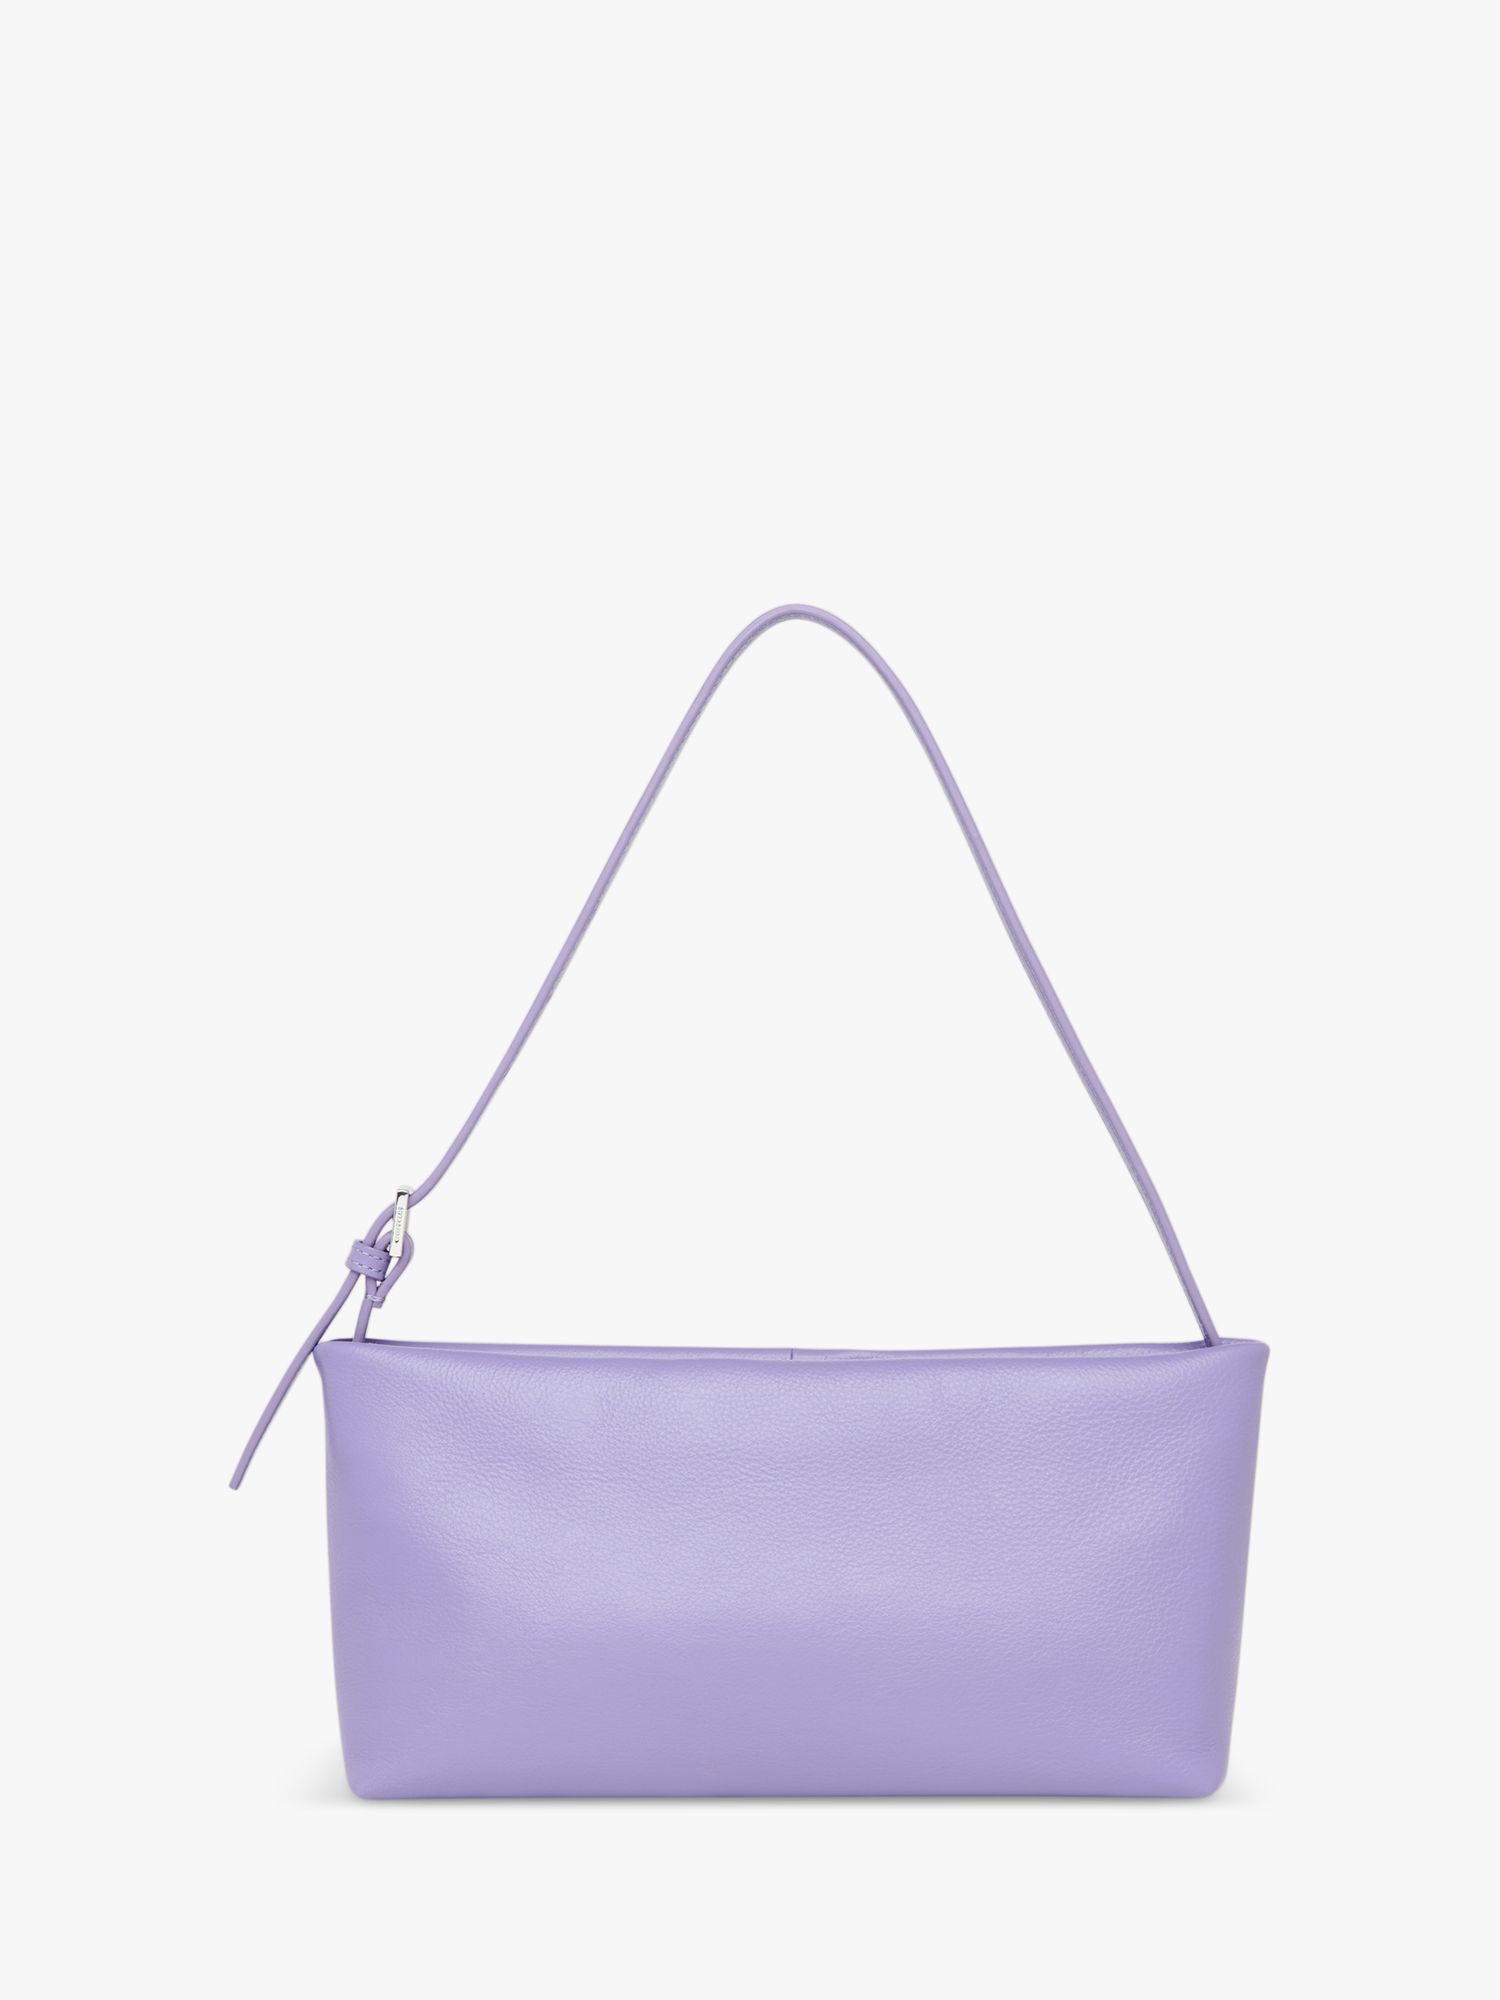 Violet Ray Faux Leather Crossbody Purse - Women's Accessories in